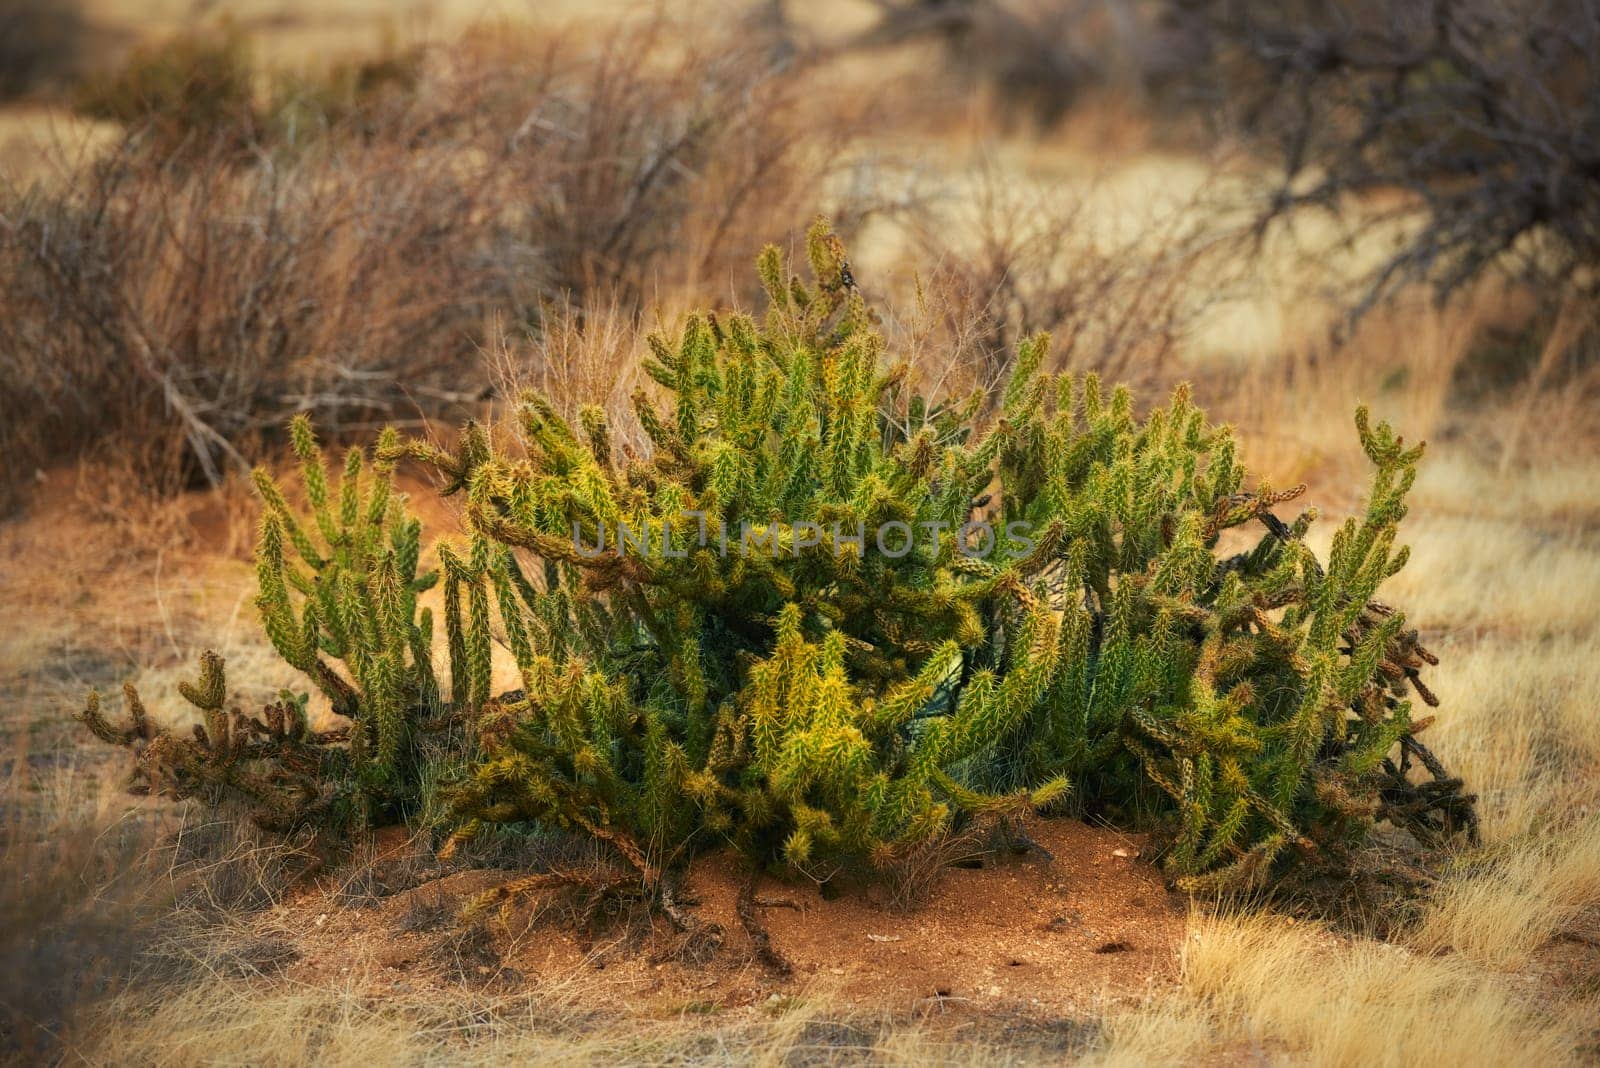 Desert, cactus and plant in bush environment outdoor in nature of California, USA. Natural, succulent and growth of indigenous shrub in summer with biodiversity in dry field, soil and grass on land.